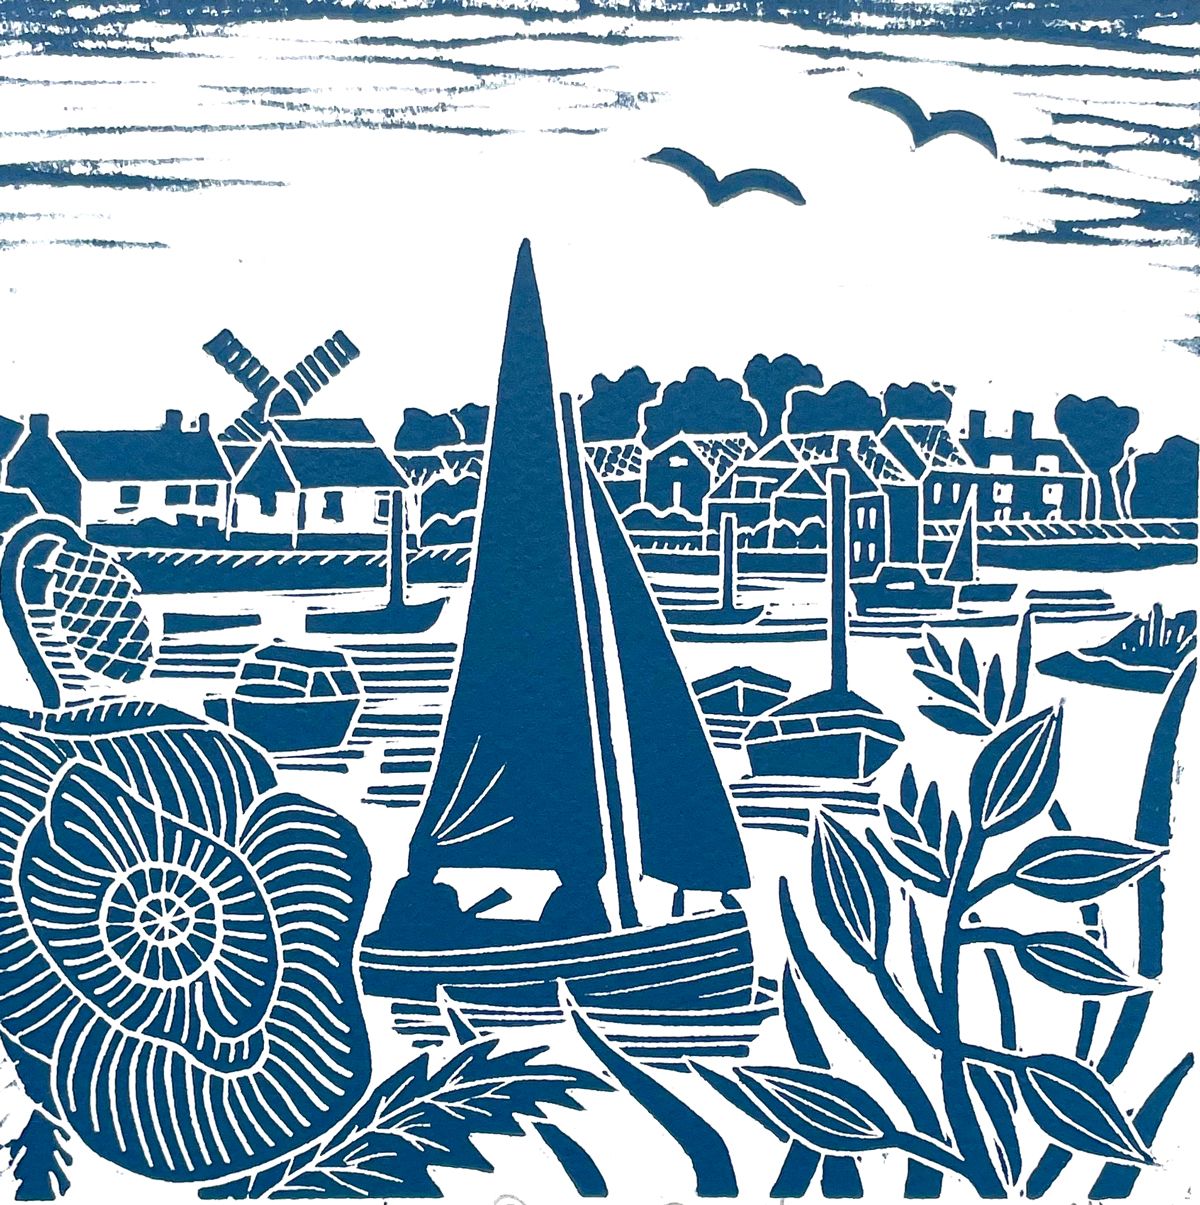 Burnham Overy Staithe by Kate Heiss